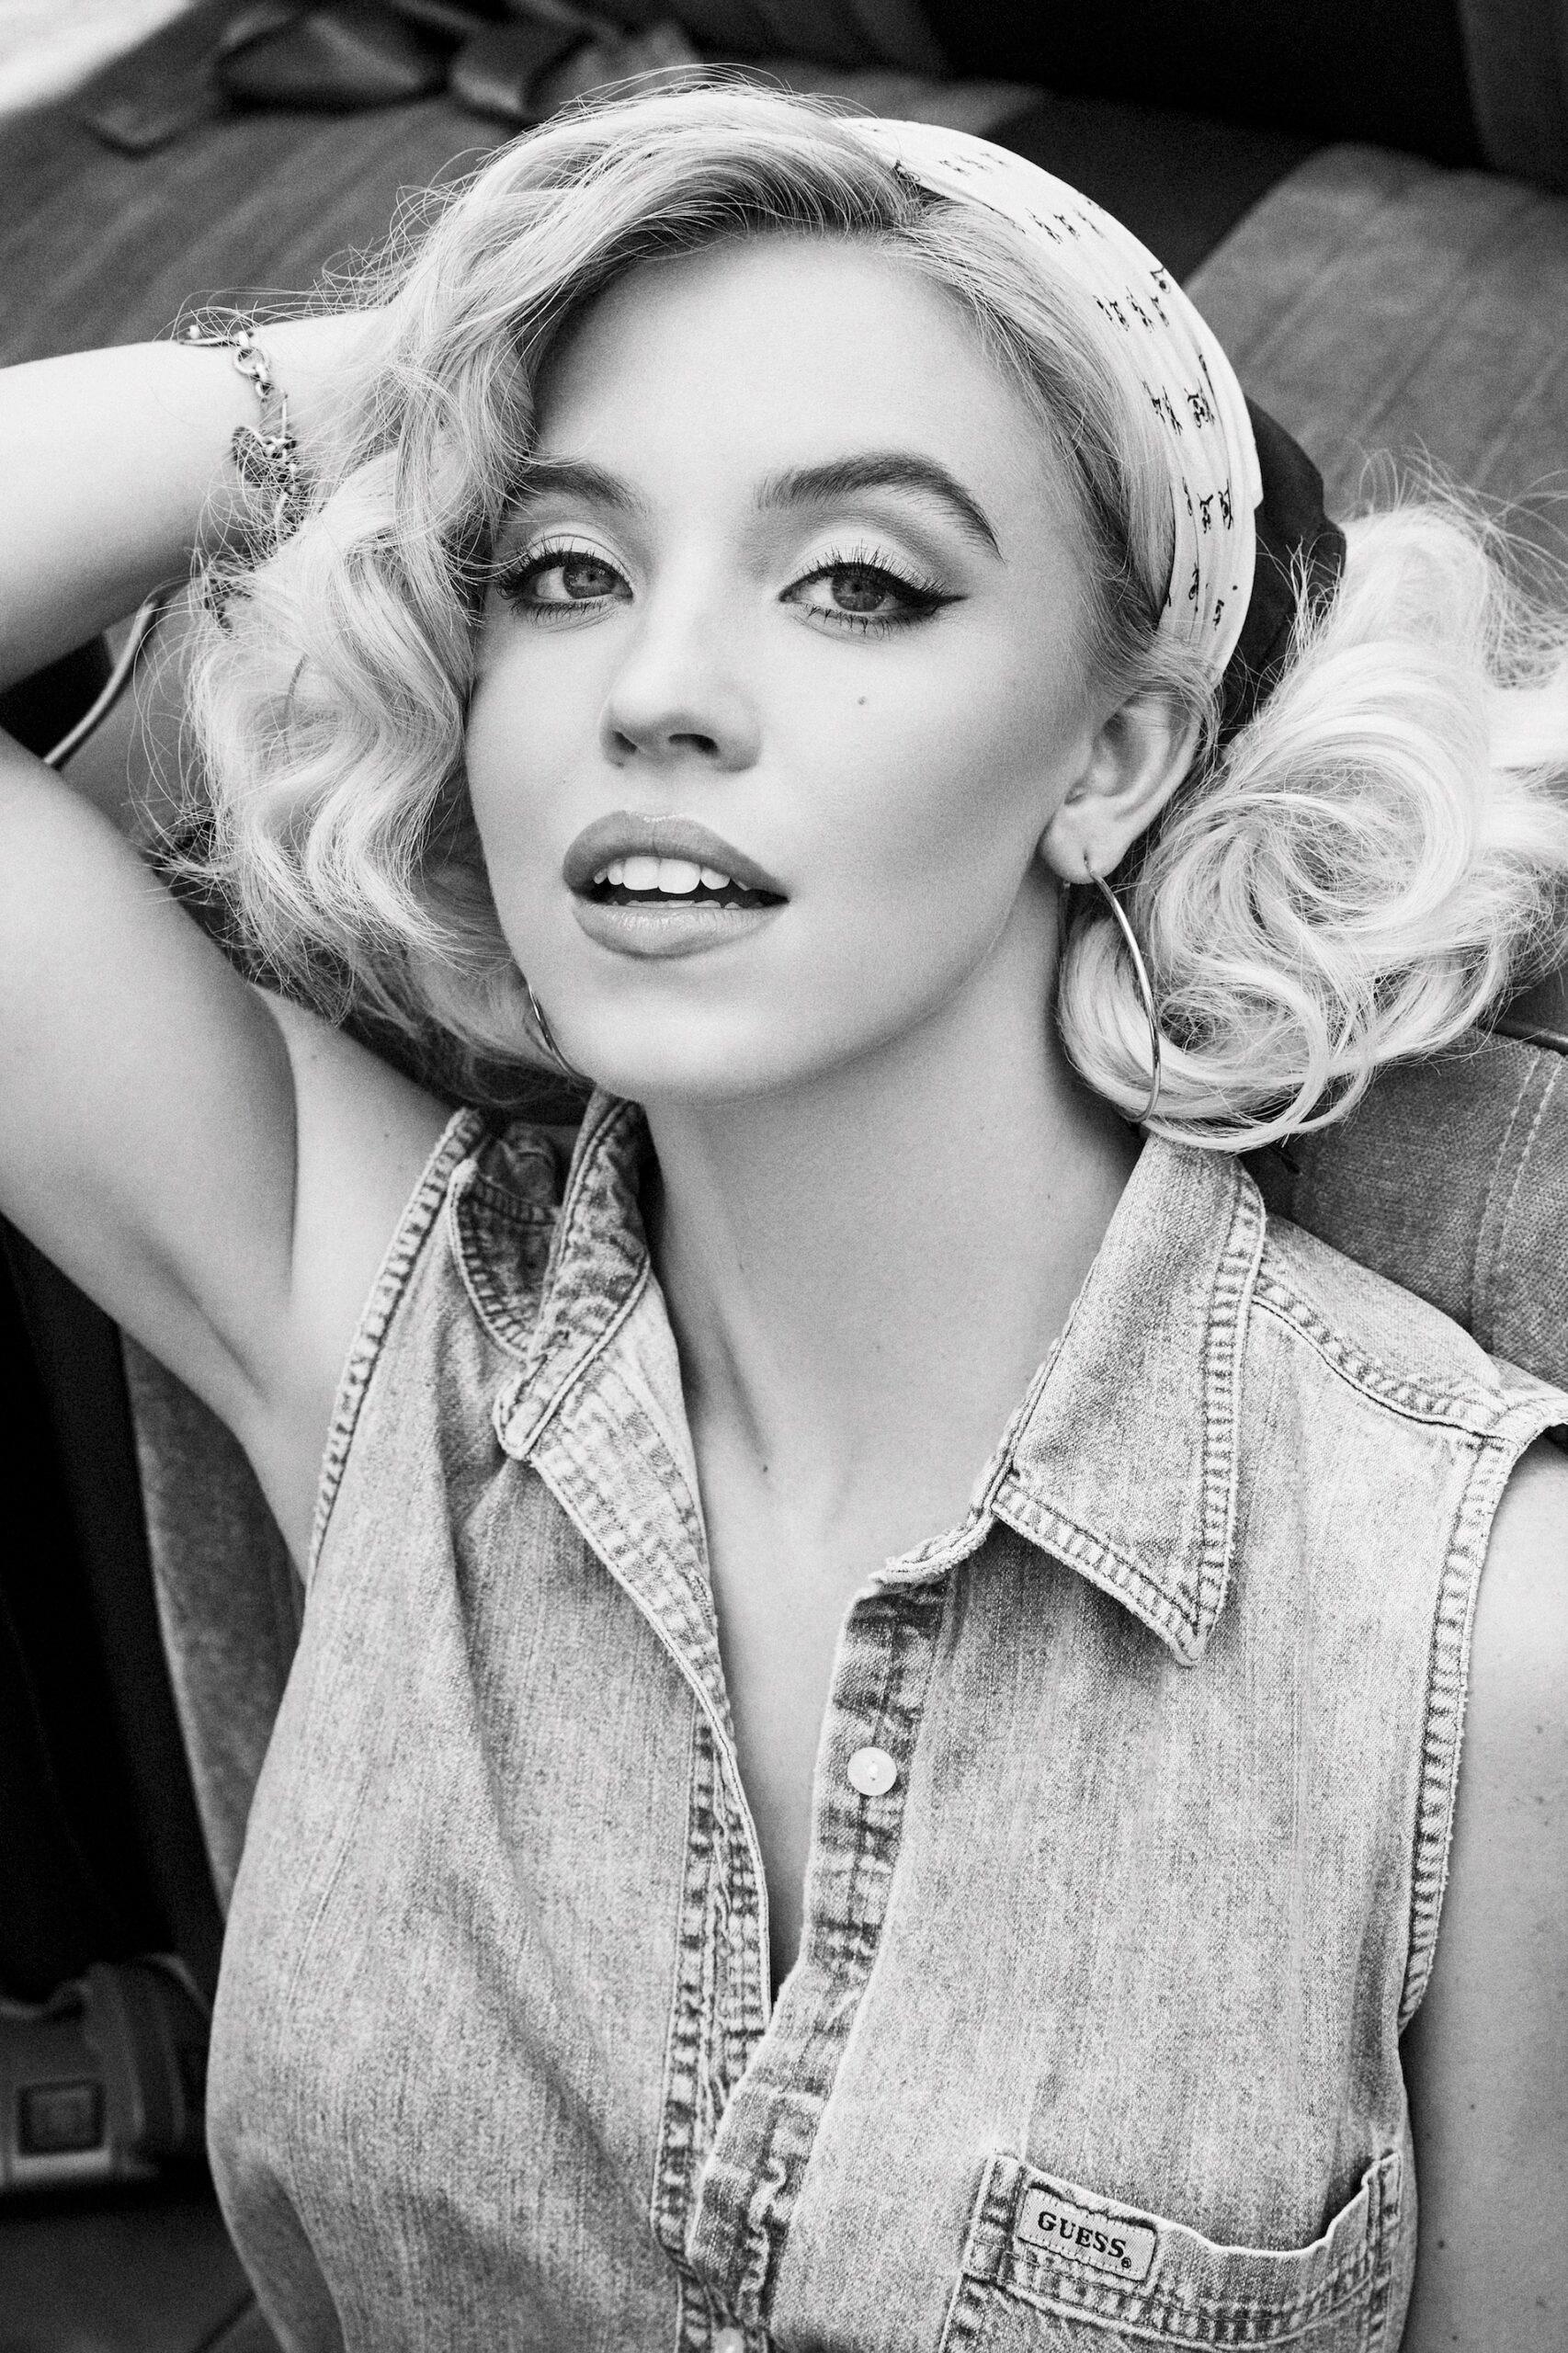 White Lotus star Sydney Sweeney channels Anna Nicole Smith in new GUESS campaign